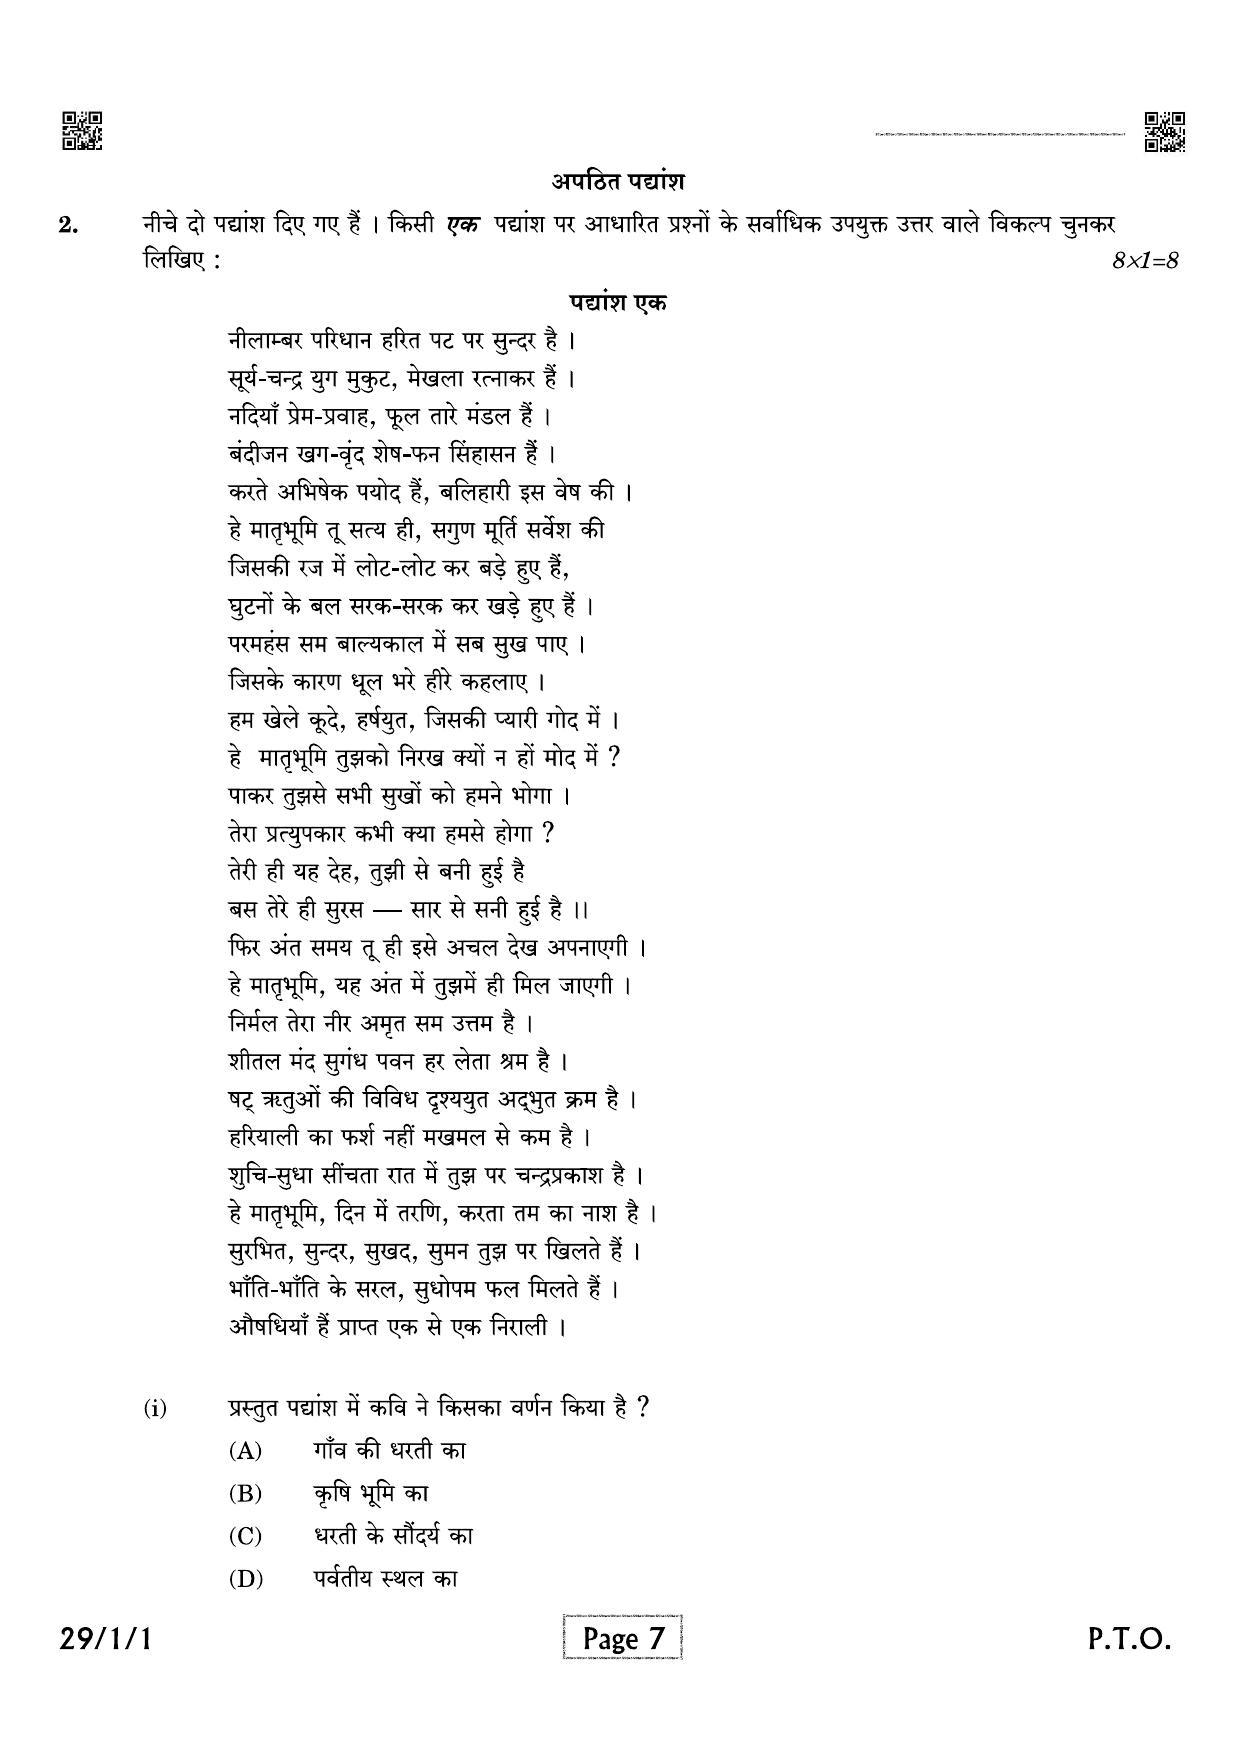 CBSE Class 12 QP_002_HINDI_ELECTIVE 2021 Compartment Question Paper - Page 7